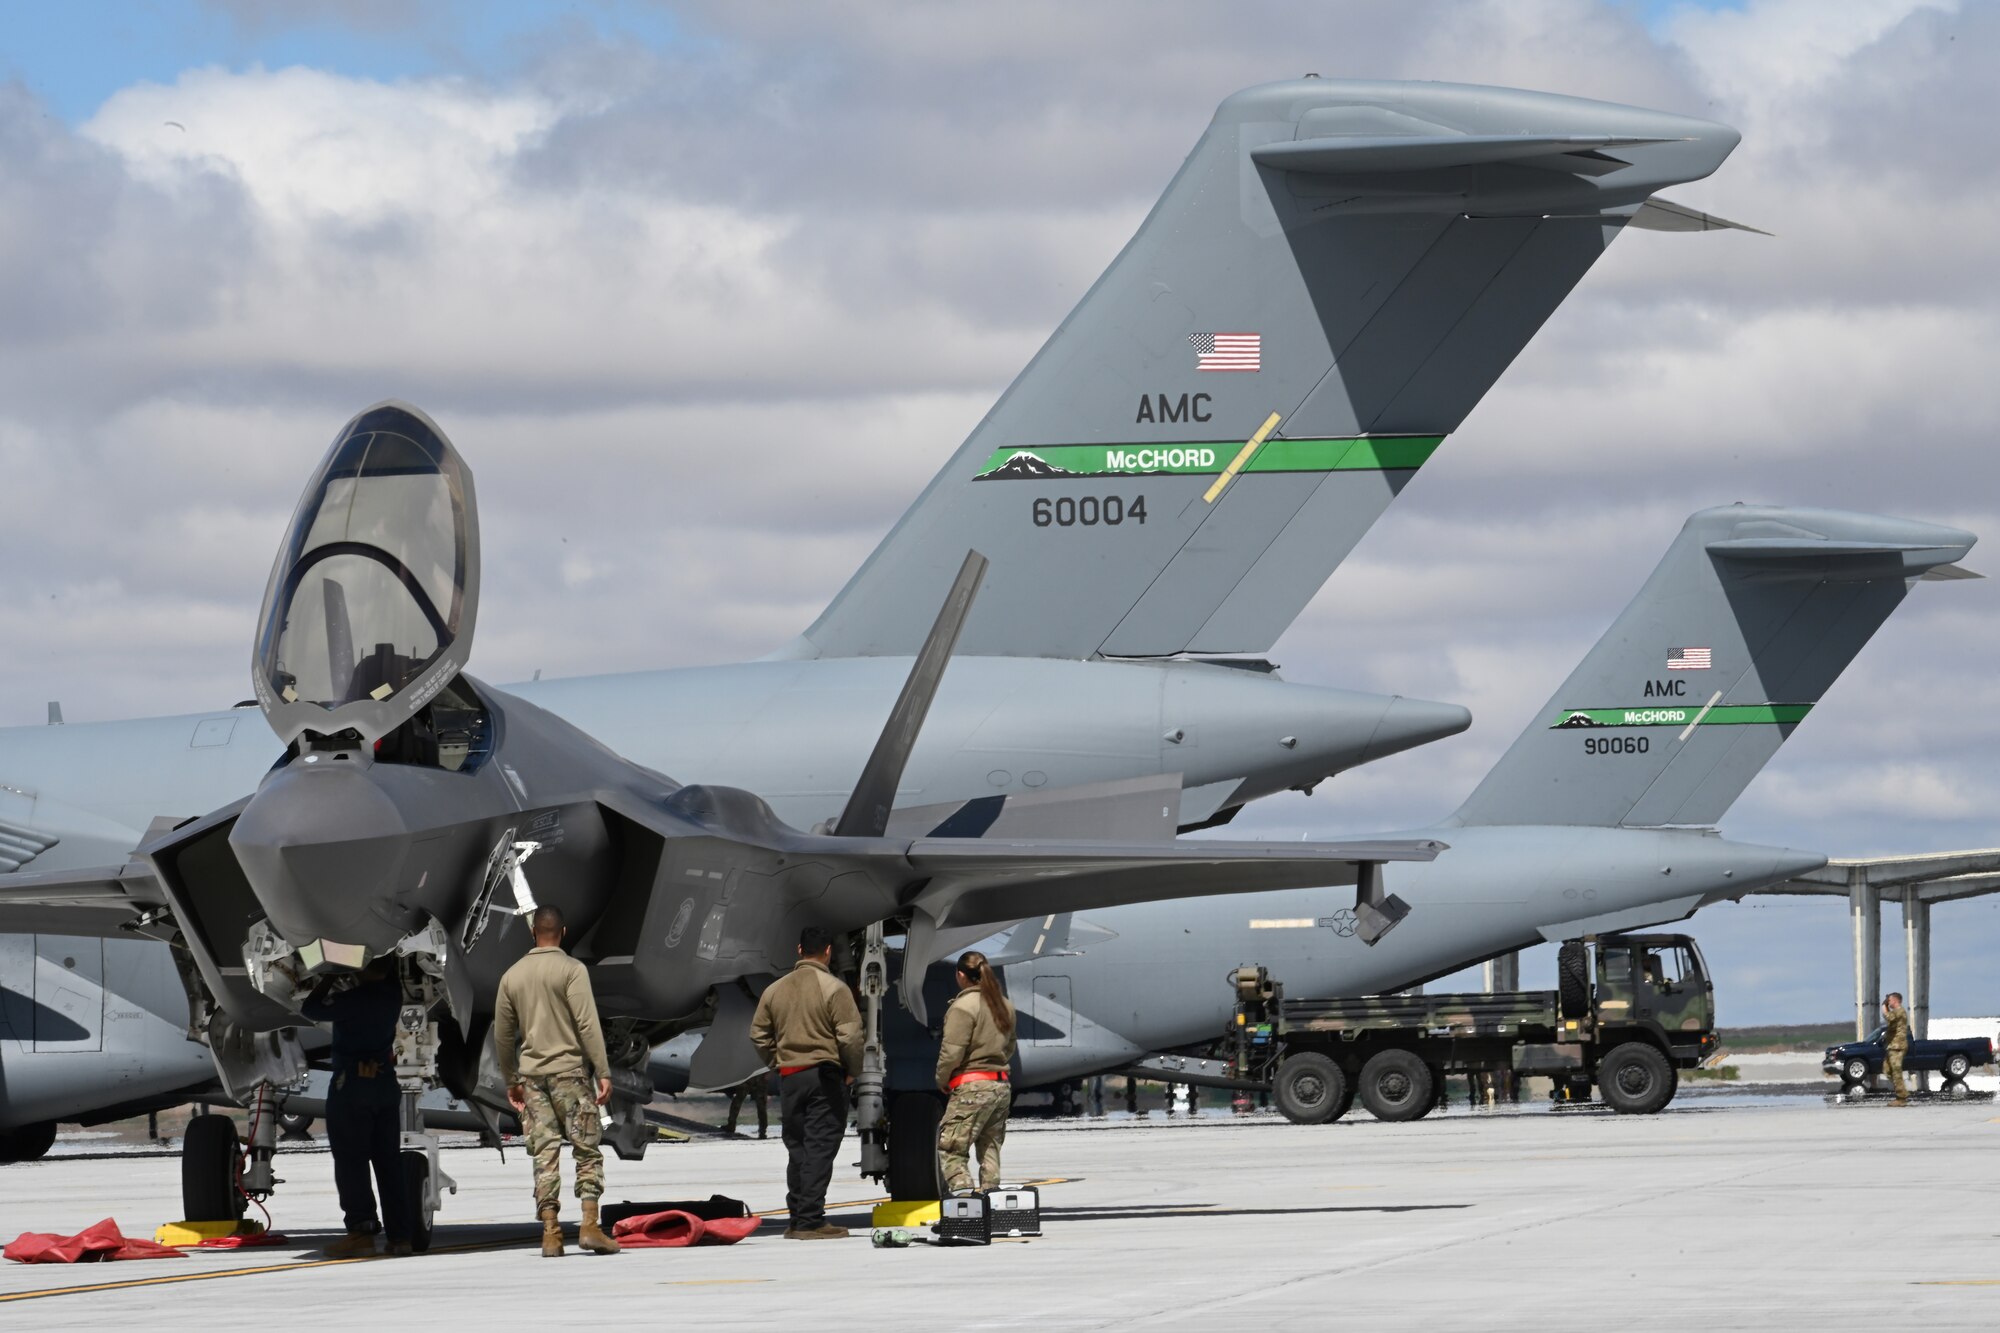 Airmen from Hill Air Force Base, Utah, observe an F-35 Lightning II April 26, 2021, on the flight line at Mountain Home AFB, Idaho. Airmen across the western United States participated in exercise Rainier War, testing their abilities to employ air combat capabilities during a time of potentially imminent foreign aggression. (U.S. Air Force photo by Staff Sgt. Christian Conrad)